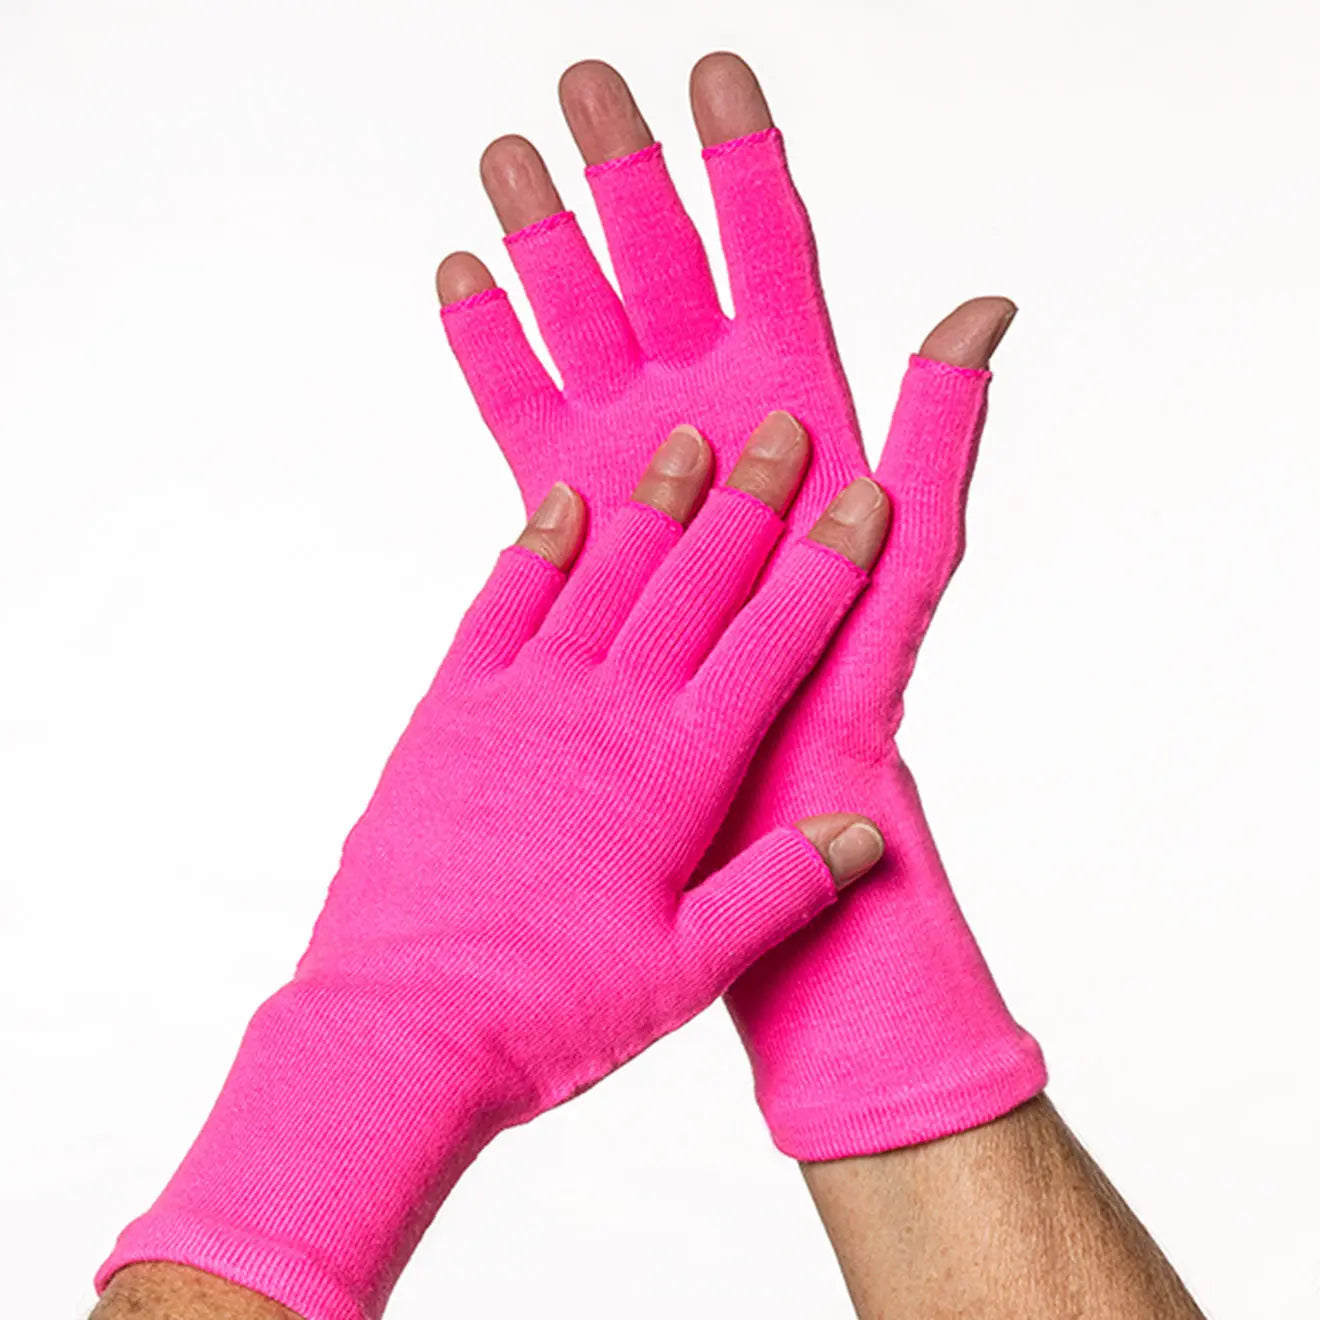 3/4 Finger Gloves - Keep hands warm with Raynauds (pair) Limbkeepers